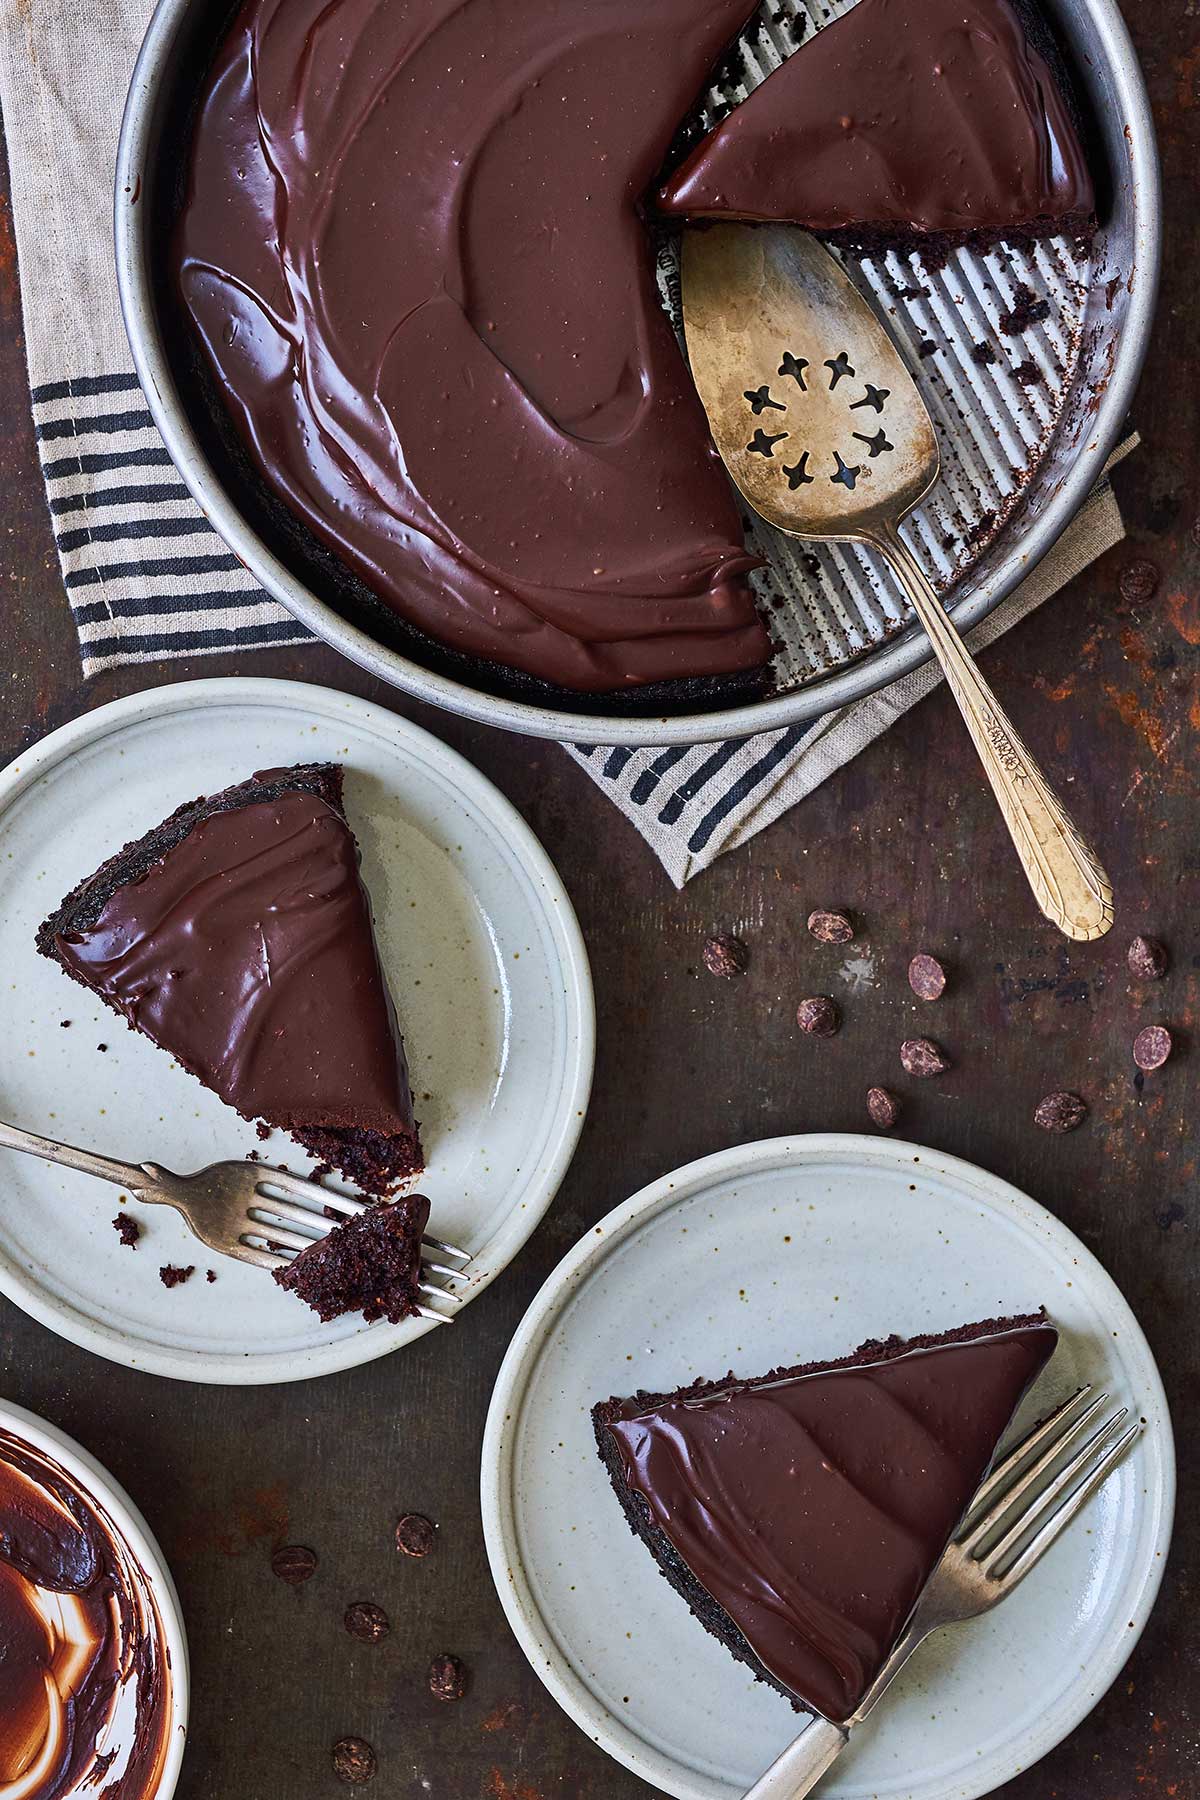 A round chocolate cake topped with chocolate frosting and a few slices on plates